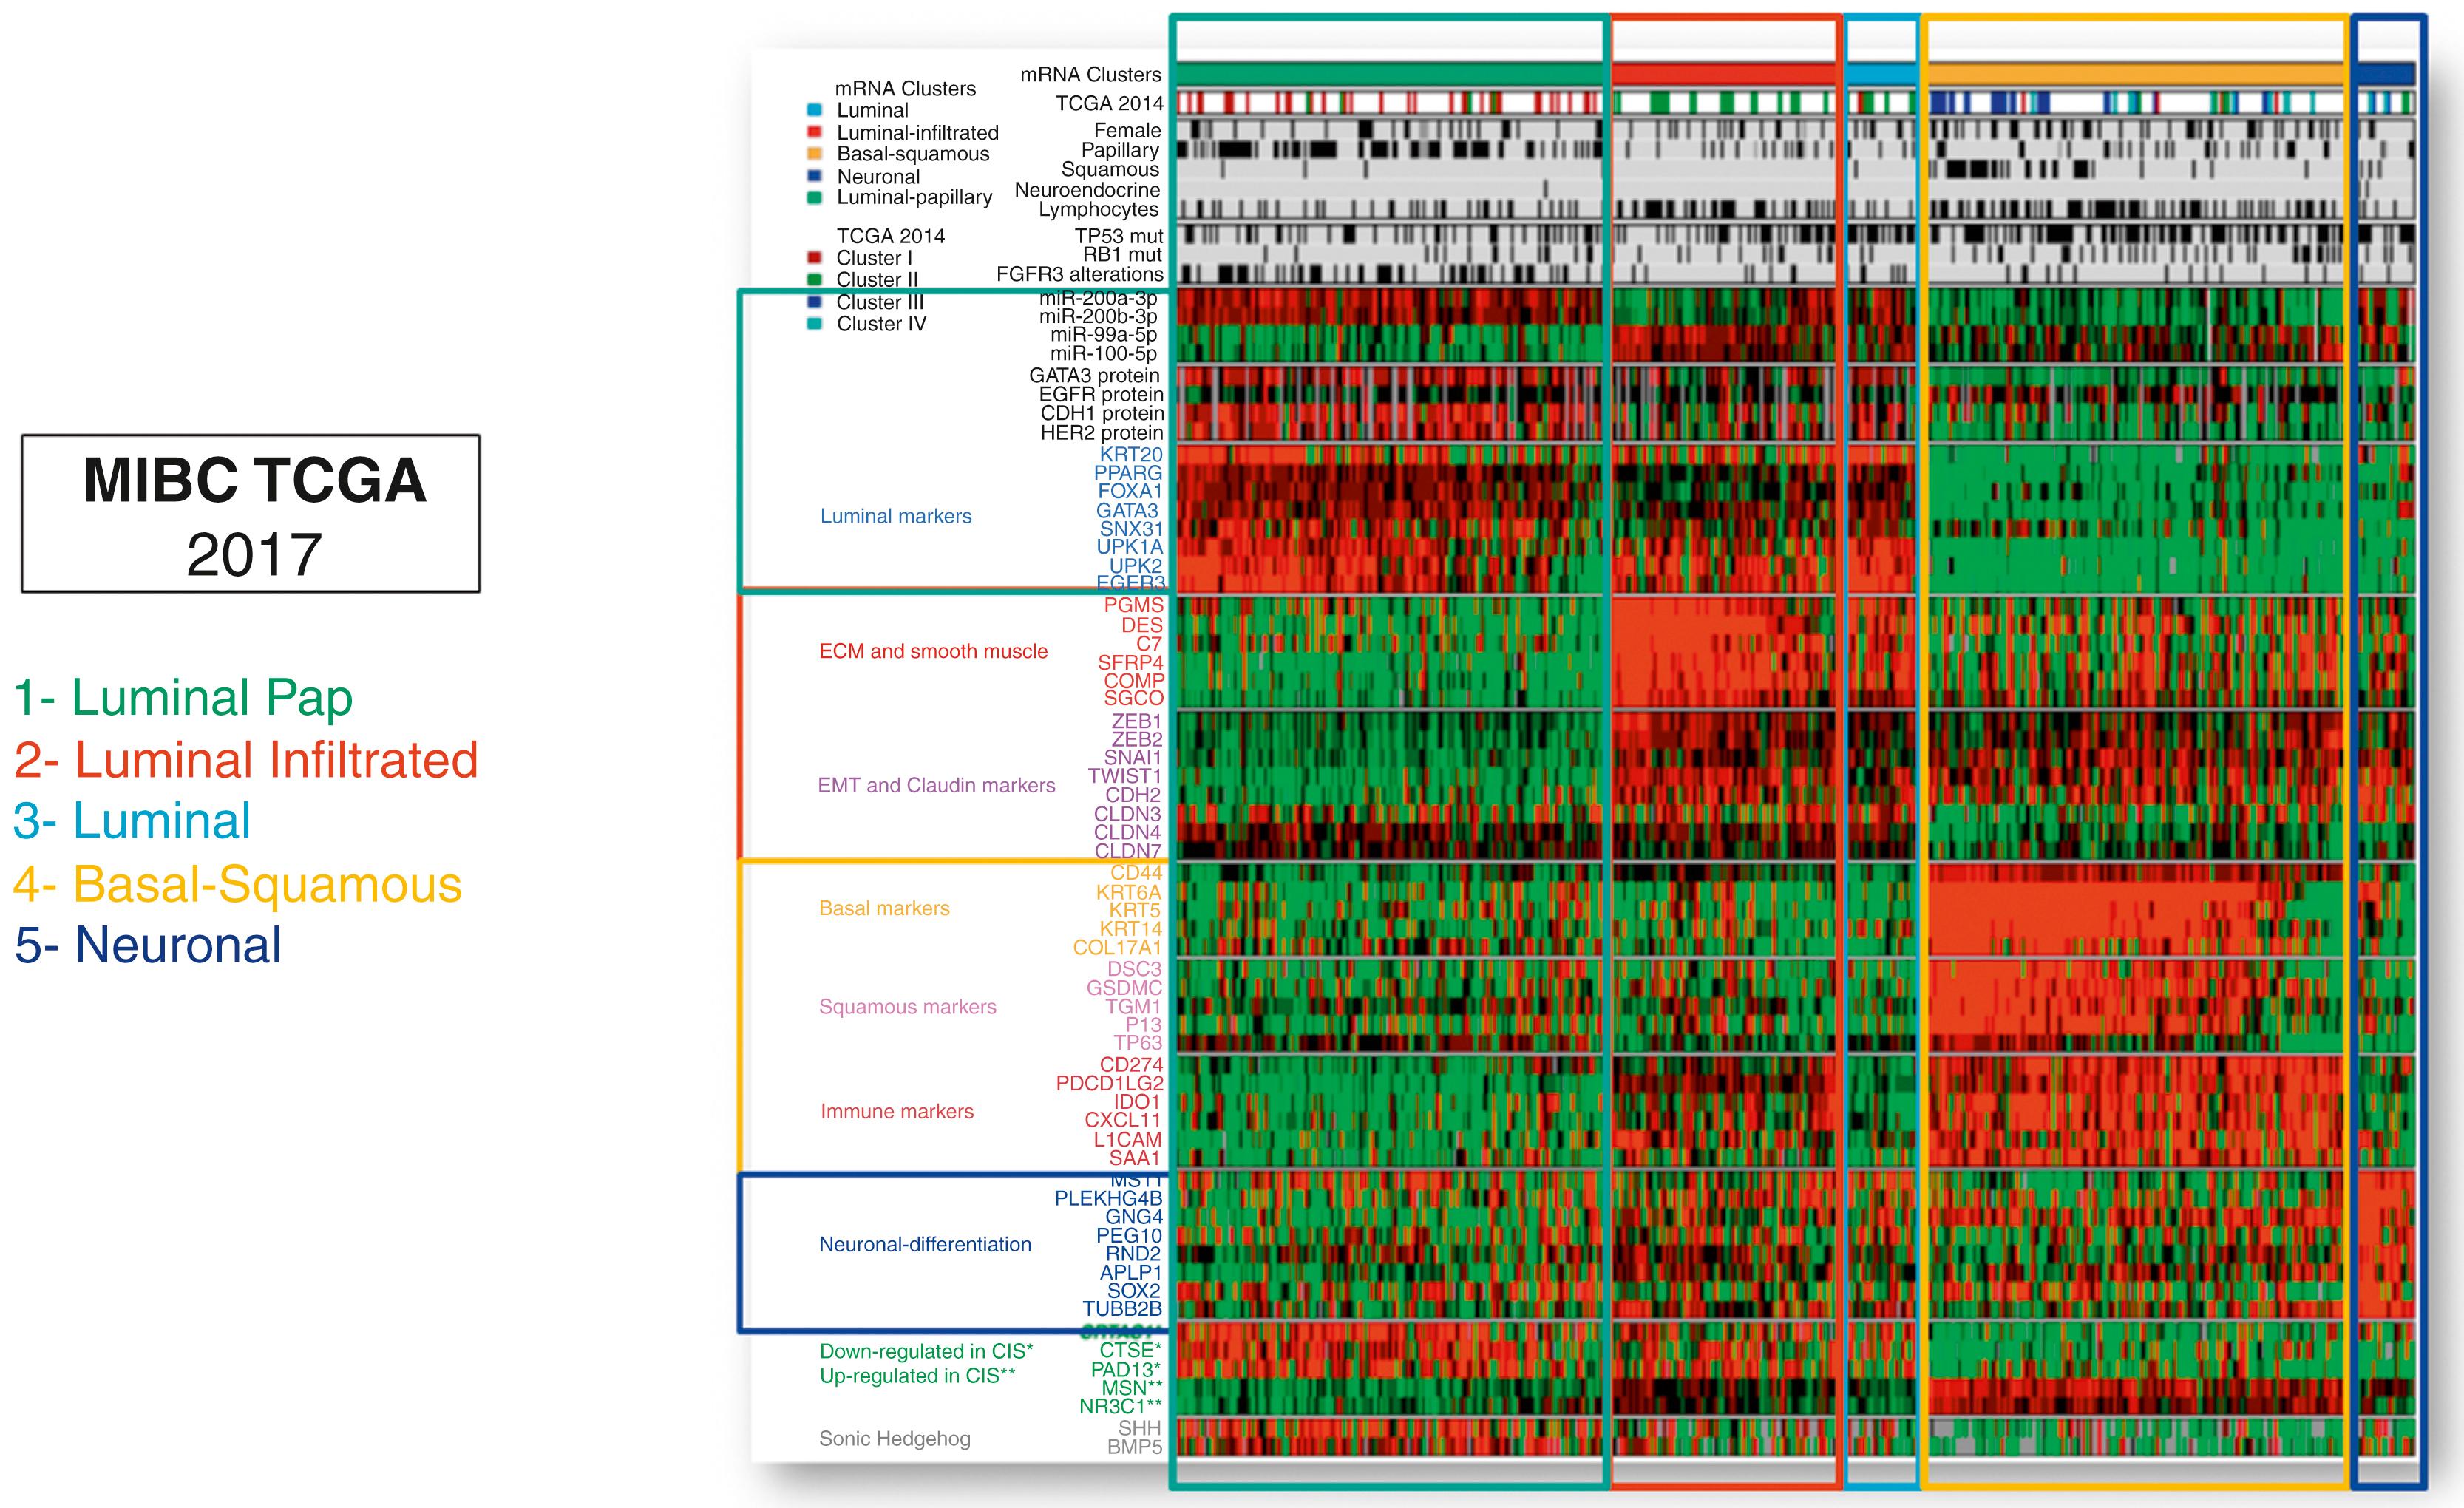 Fig. 17.14, Five mRNA expression subtypes (clusters) are indicated in first row: luminal-papillary, luminal-infiltrated, luminal, basal-squamous, and neuronal. Subsequent rows indicate corresponding 2014 TCGA subtypes; selected clinical covariates and key genetic alterations; normalized expression for miRNAs and proteins; and mRNA expression for selected genes.